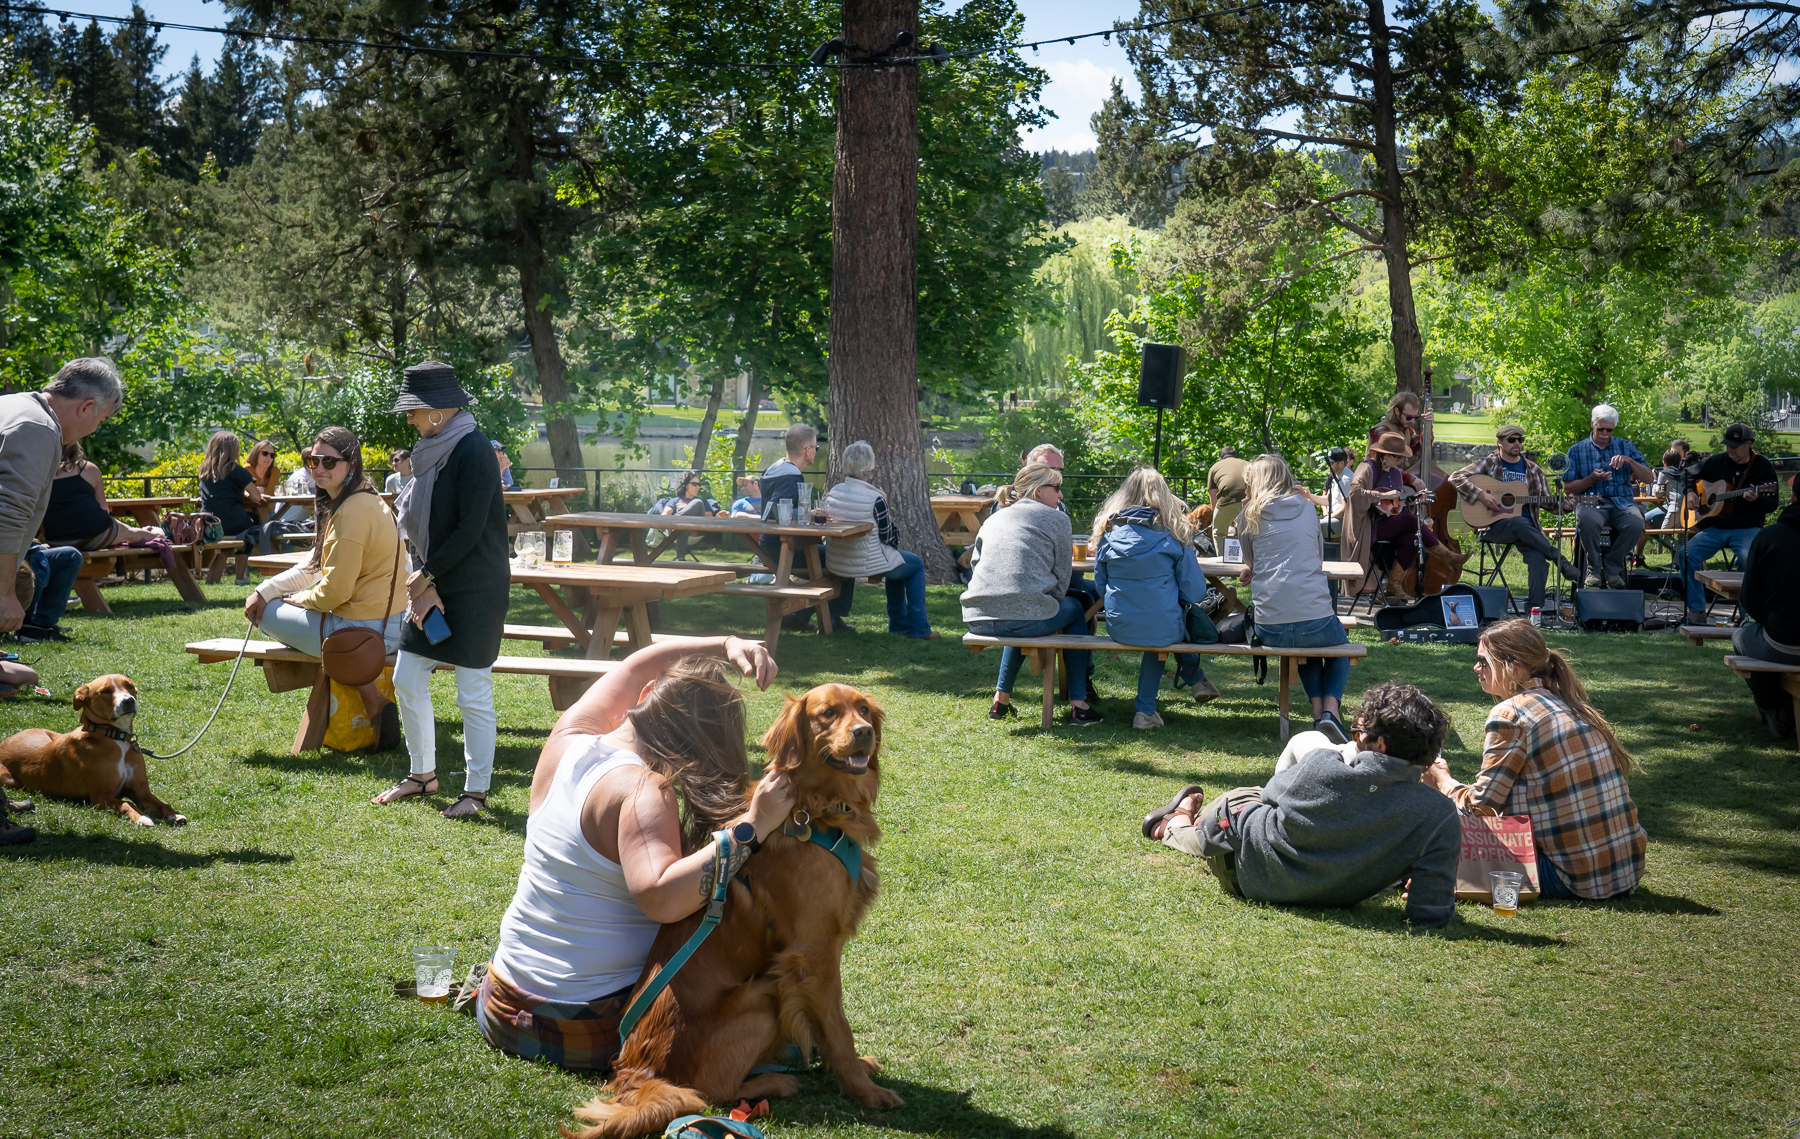 Dogs and people on lawn and tables listen to music along the river.